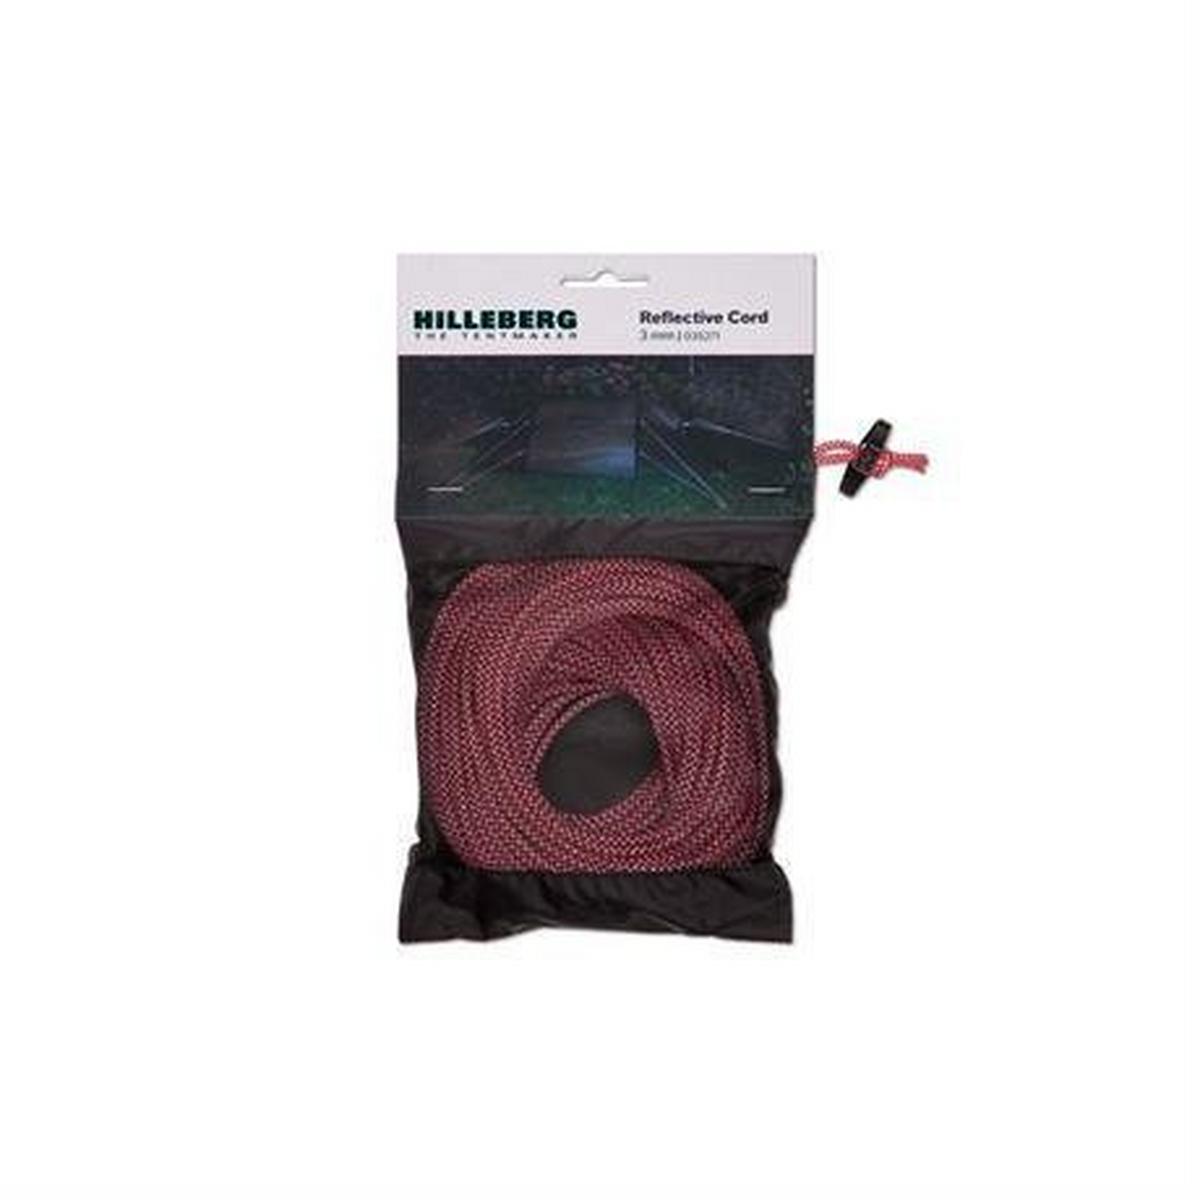 Hilleberg Guy Line Cord 3mm - Red & White Reflective (25m)